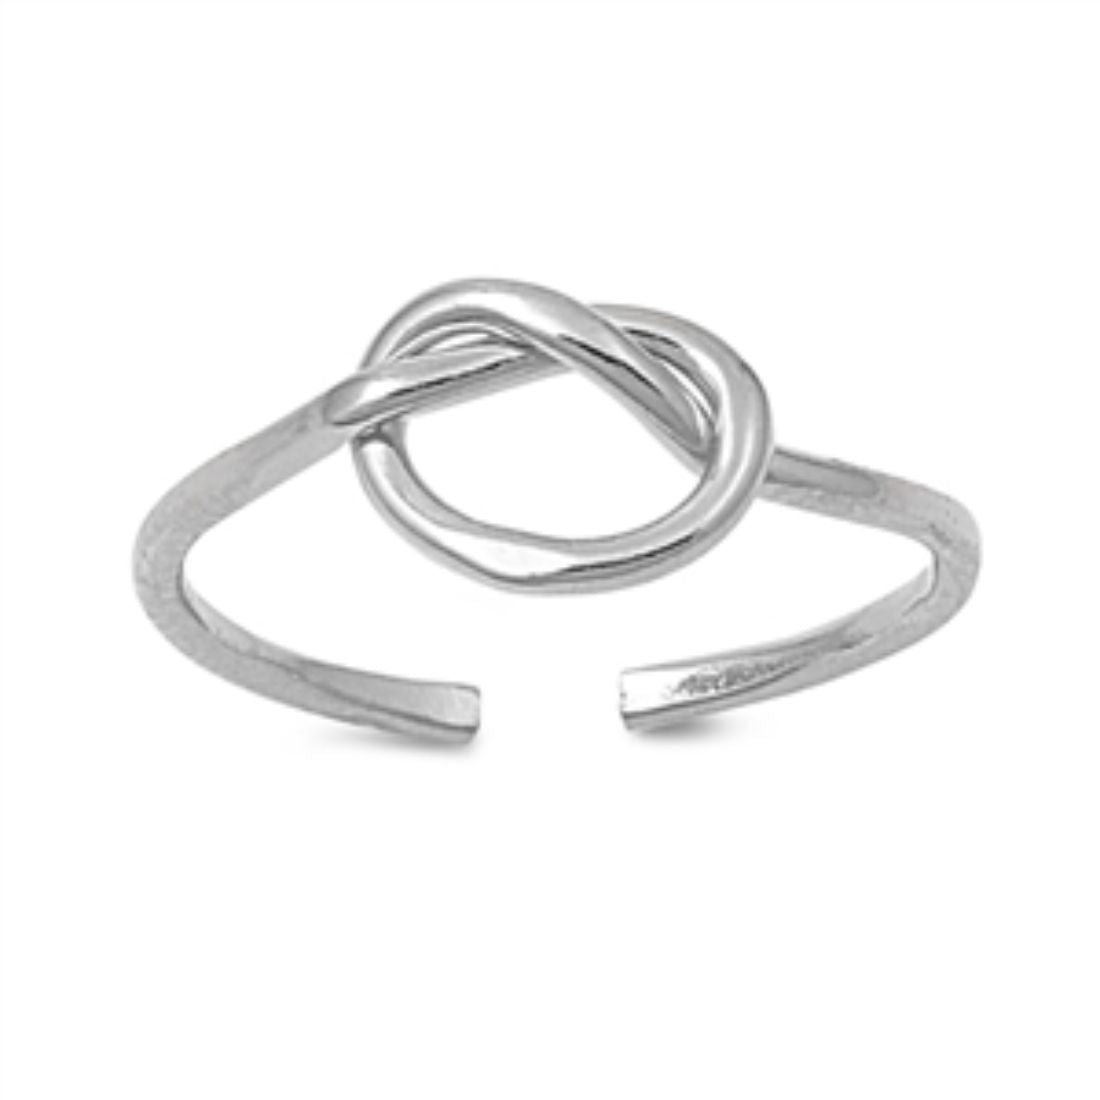 Silver Toe Ring Adjustable Band 925 Sterling Silver (5.5mm)